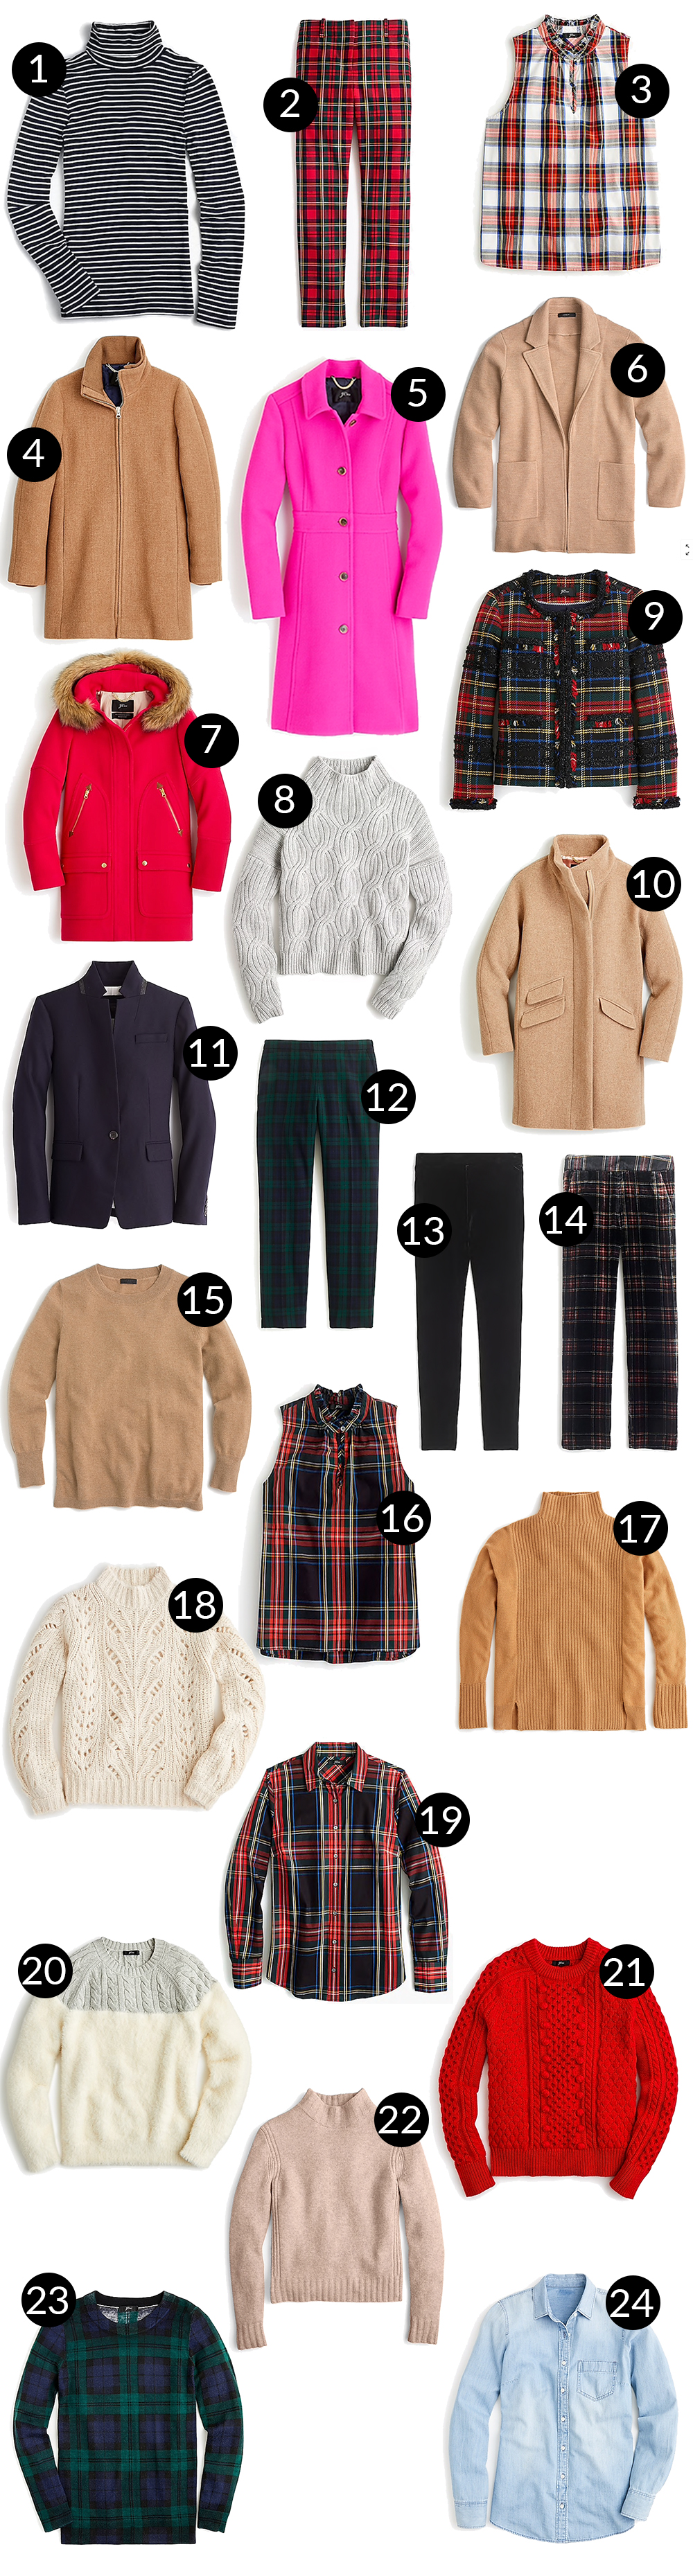 Black Friday sales - J.Crew - Kelly in the City